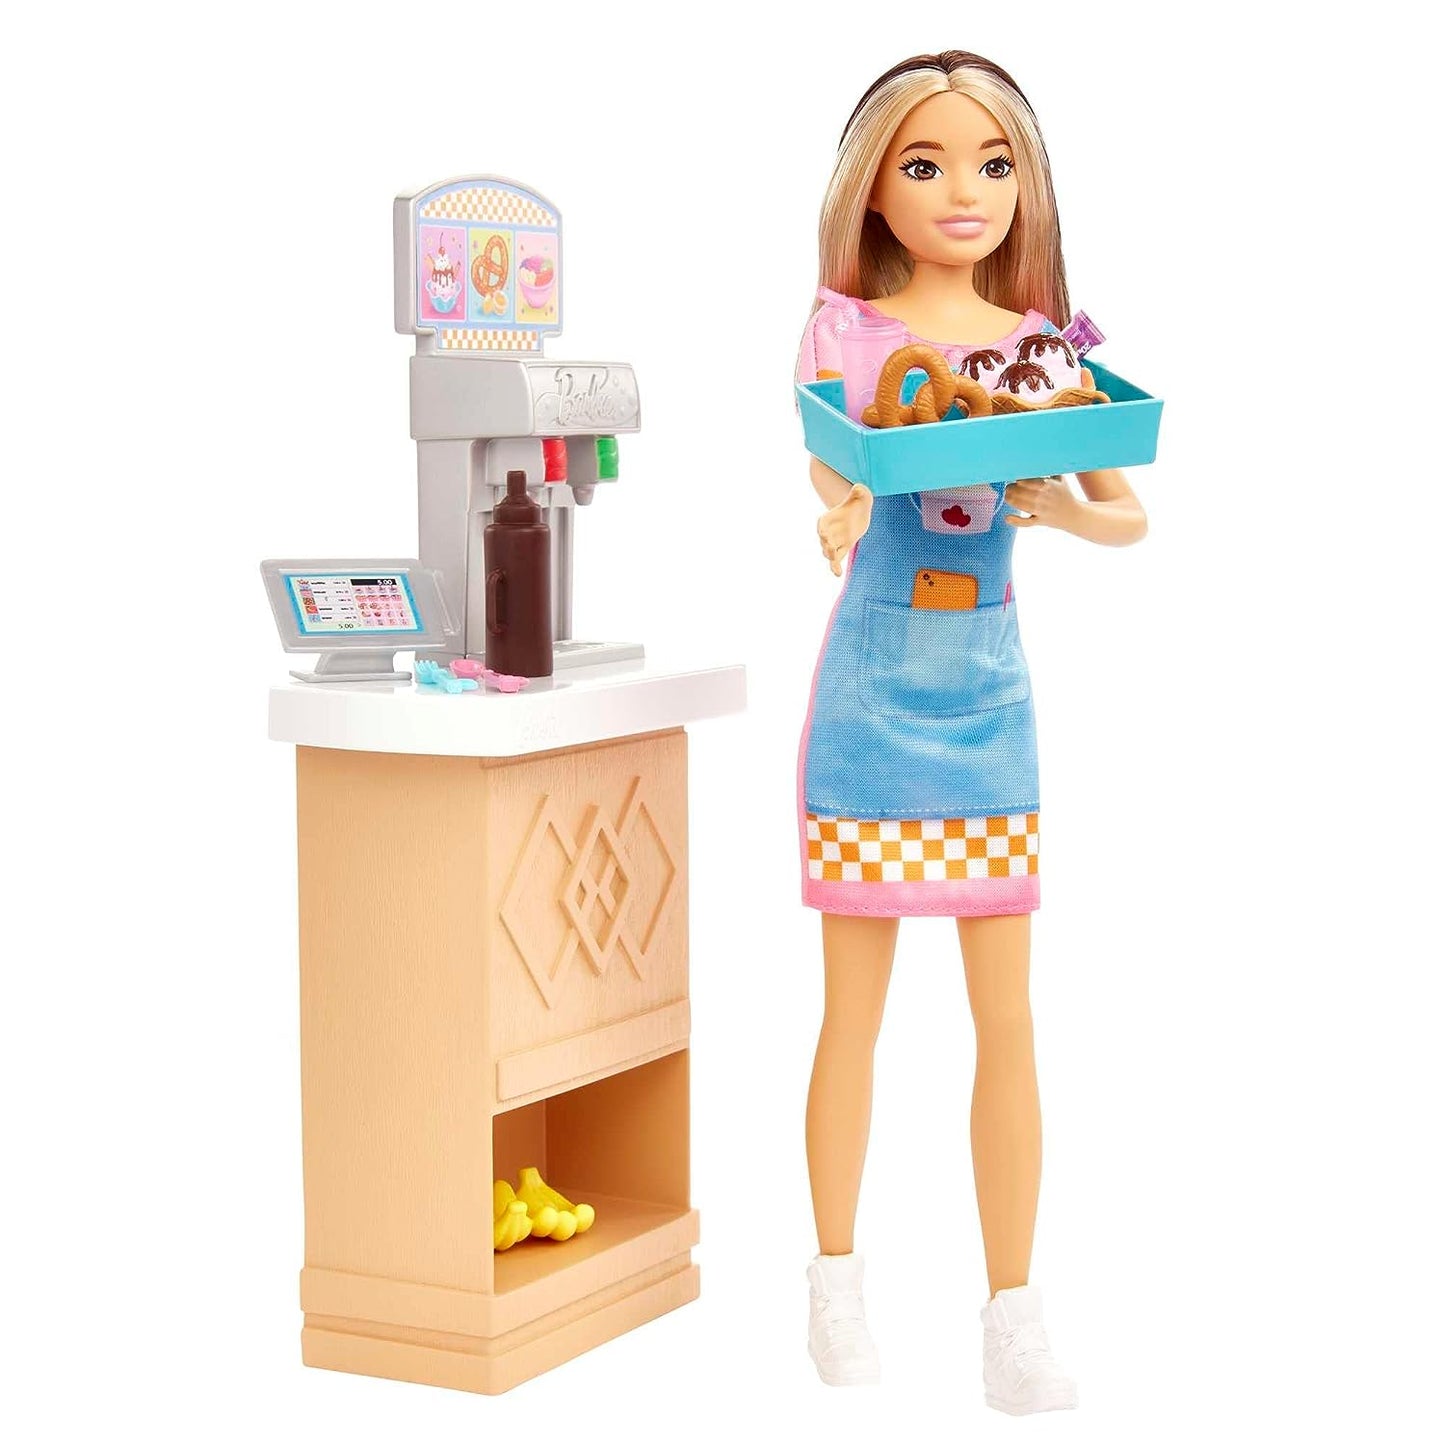 Barbie Toys: Skipper Doll & Snack Bar Playset HKD79 - Color-Change Sundae with 8 Additional Accessories, Multicolor